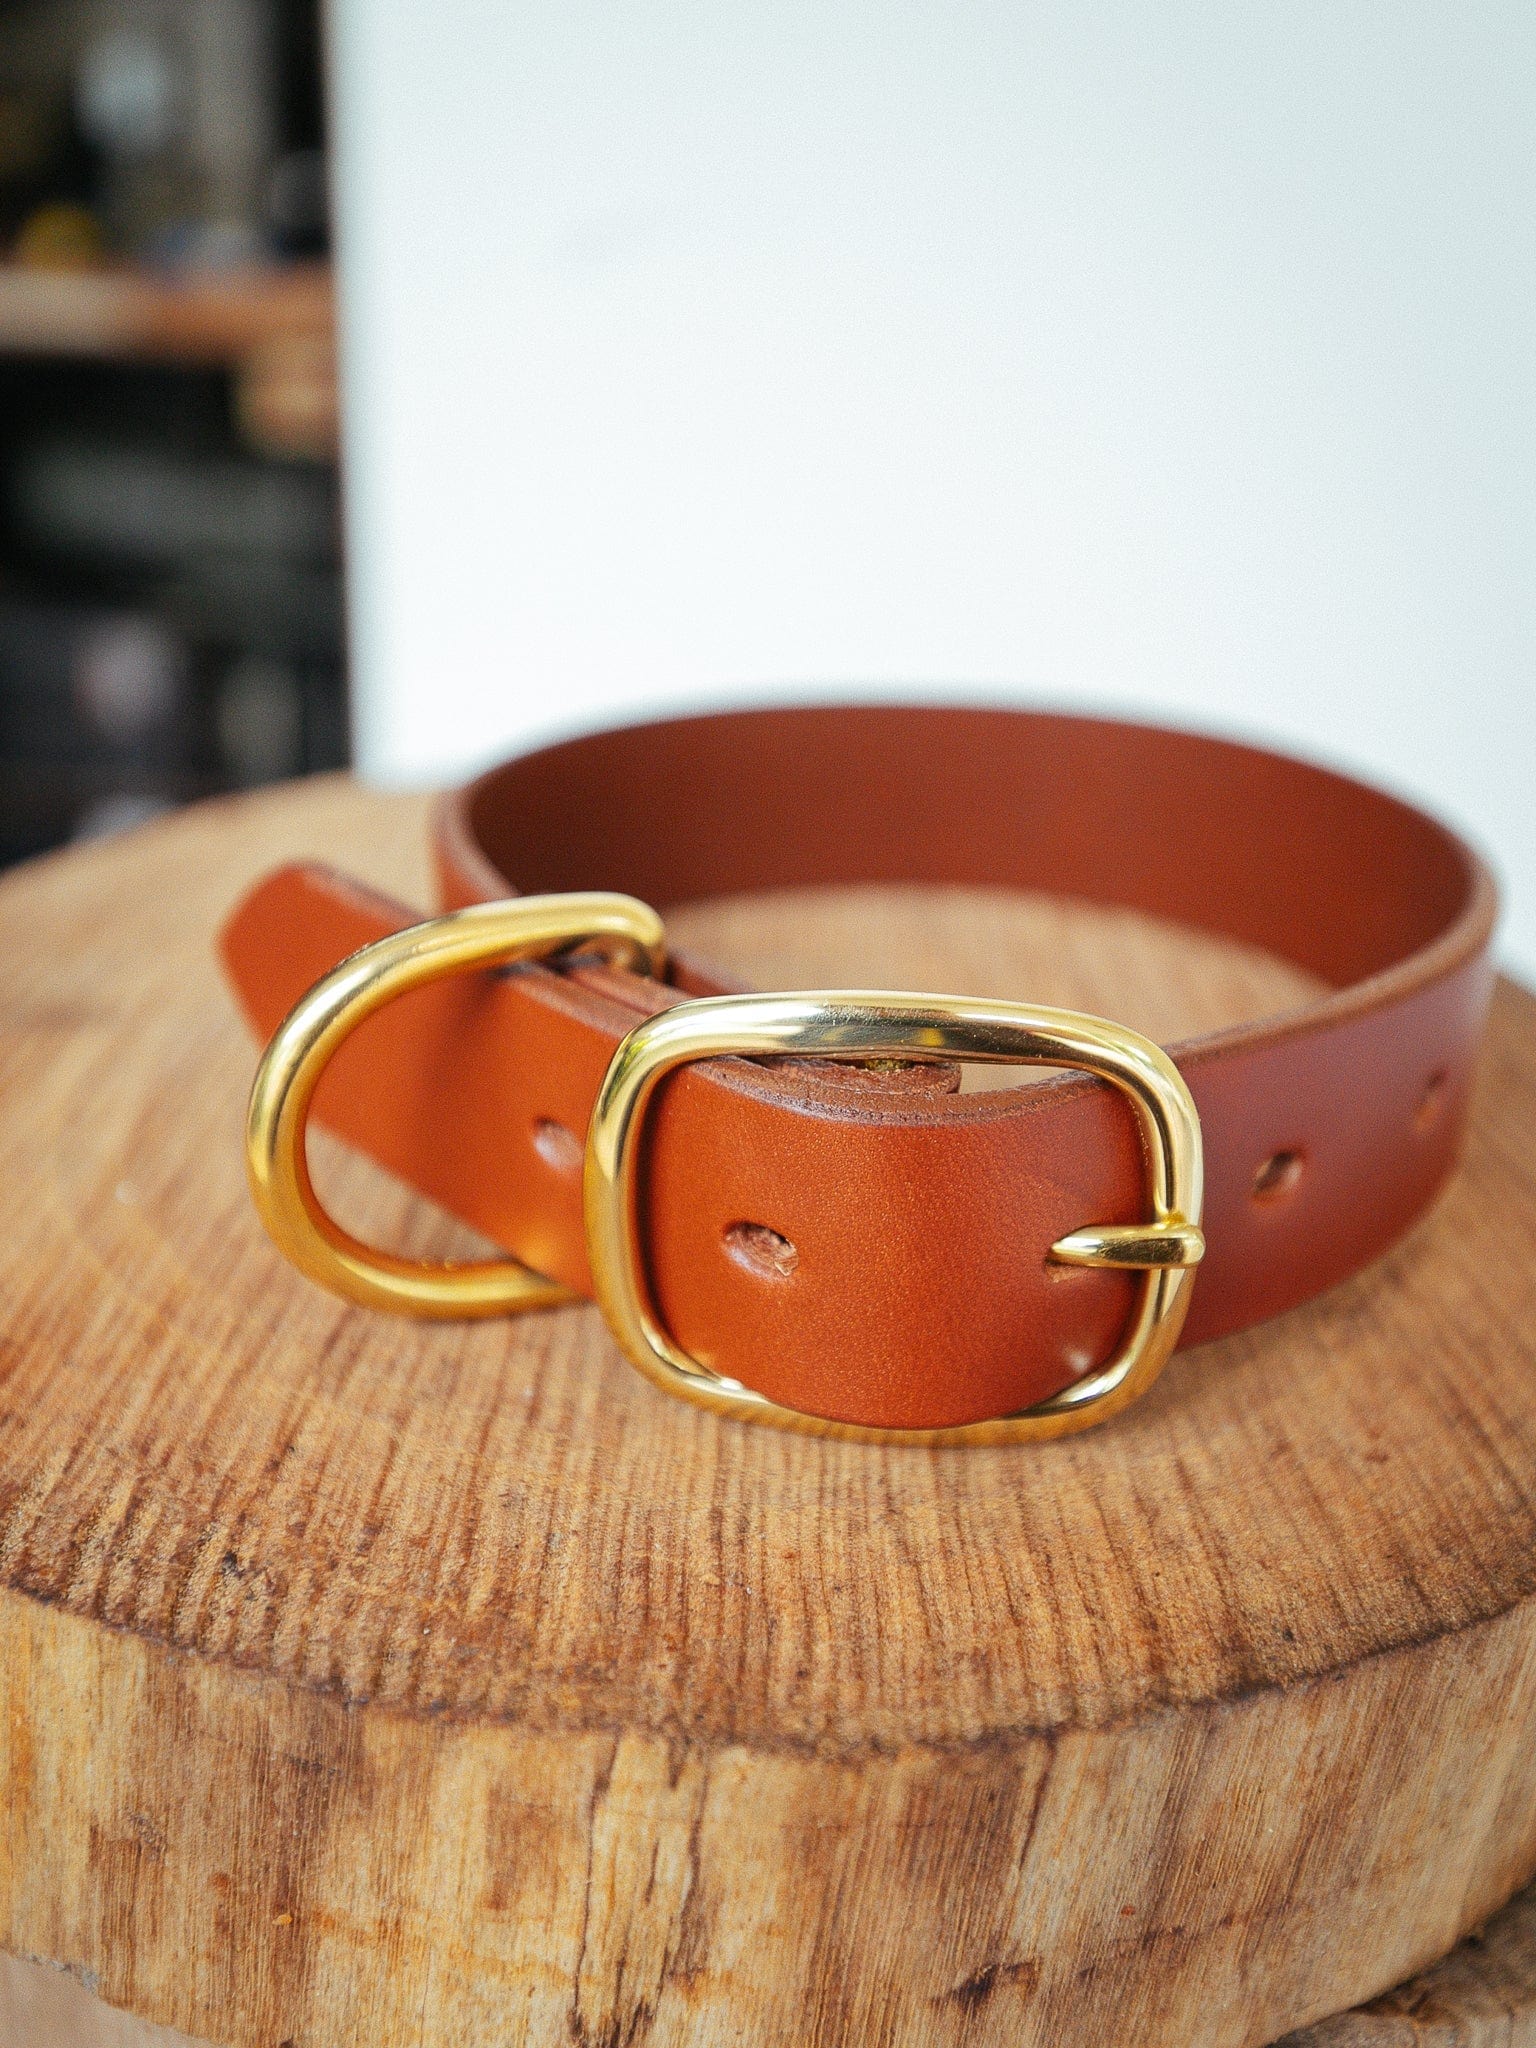 The Real McCaul Leathergoods Pet Collars & Harnesses X Small (20-29cm) / Gold Classic Dog Collar - 32mm - Tan Australian Made Australian Owned Leather Dog Collar with Brass Fittings- Australian Made